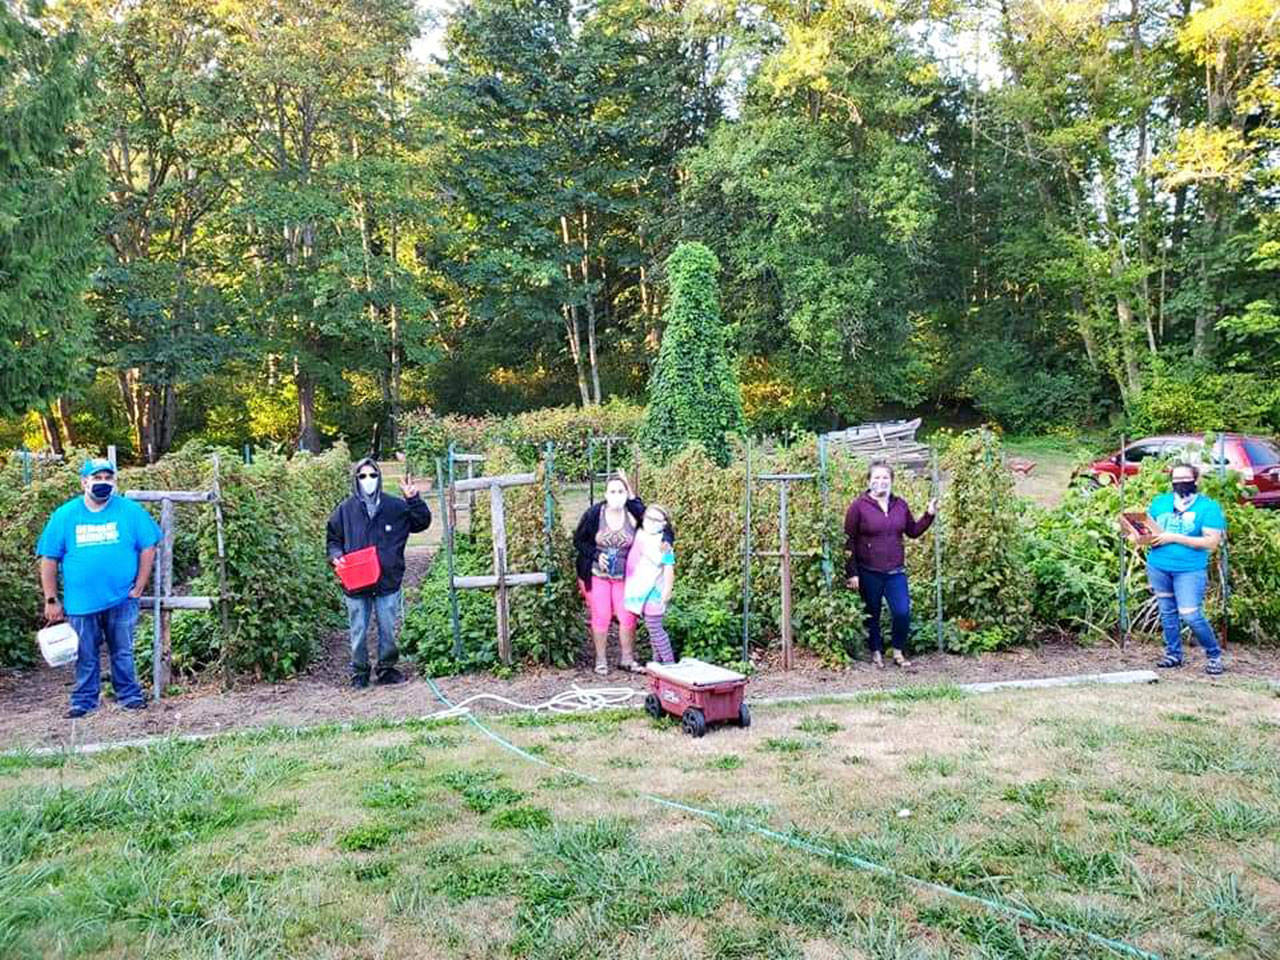 The WSU Extension Gleaning Program is seeking local fruit and vegetables not being collected by property owners. Each year, gleaners rescue tens of thousands of pounds of produce that would otherwise go to waste, program organizers say. (Photo courtesy of WSU Extension Gleaning Program )